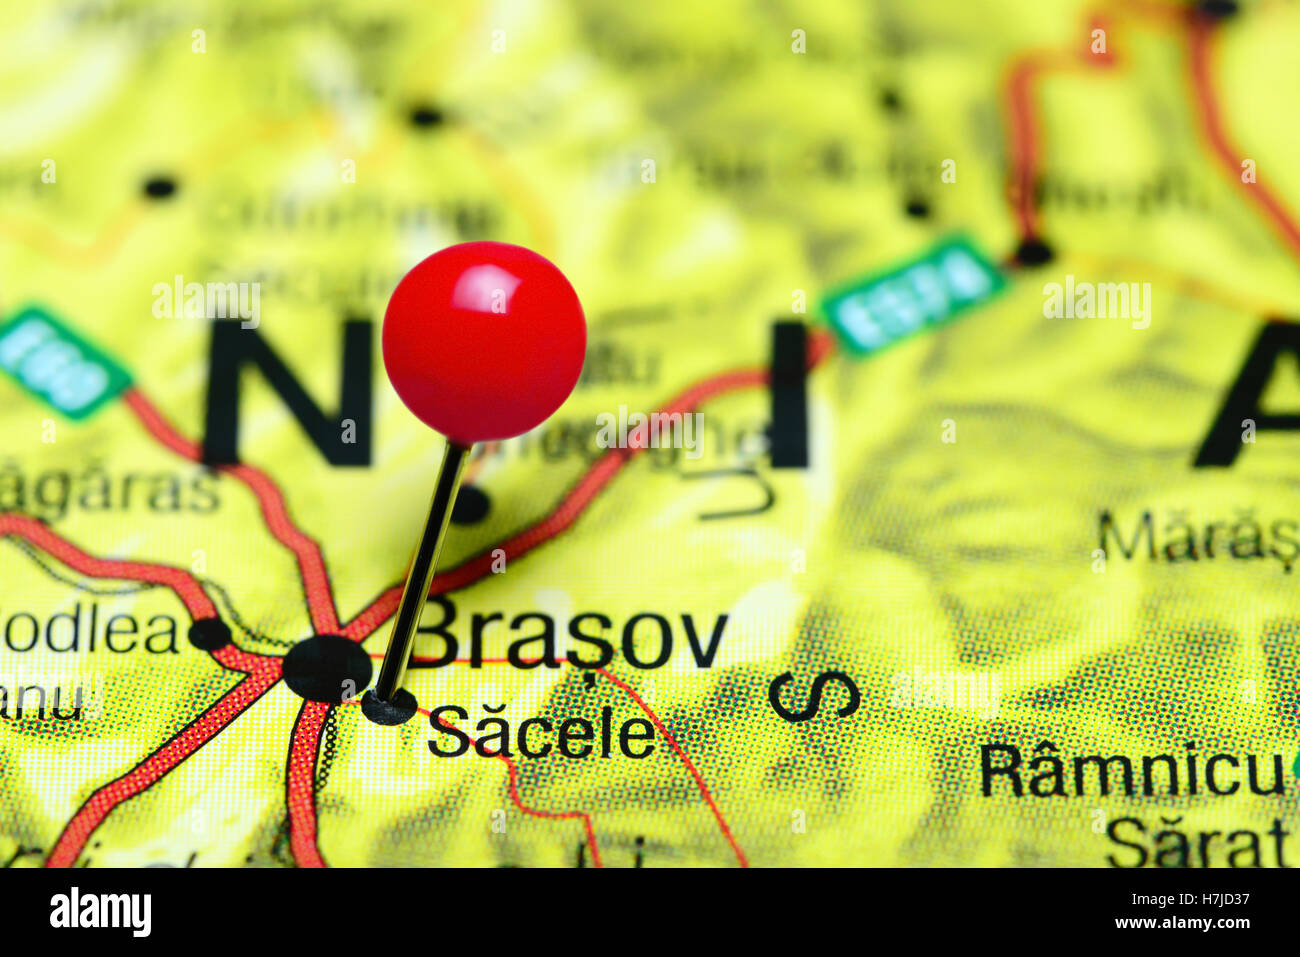 Sacele pinned on a map of Romania Stock Photo